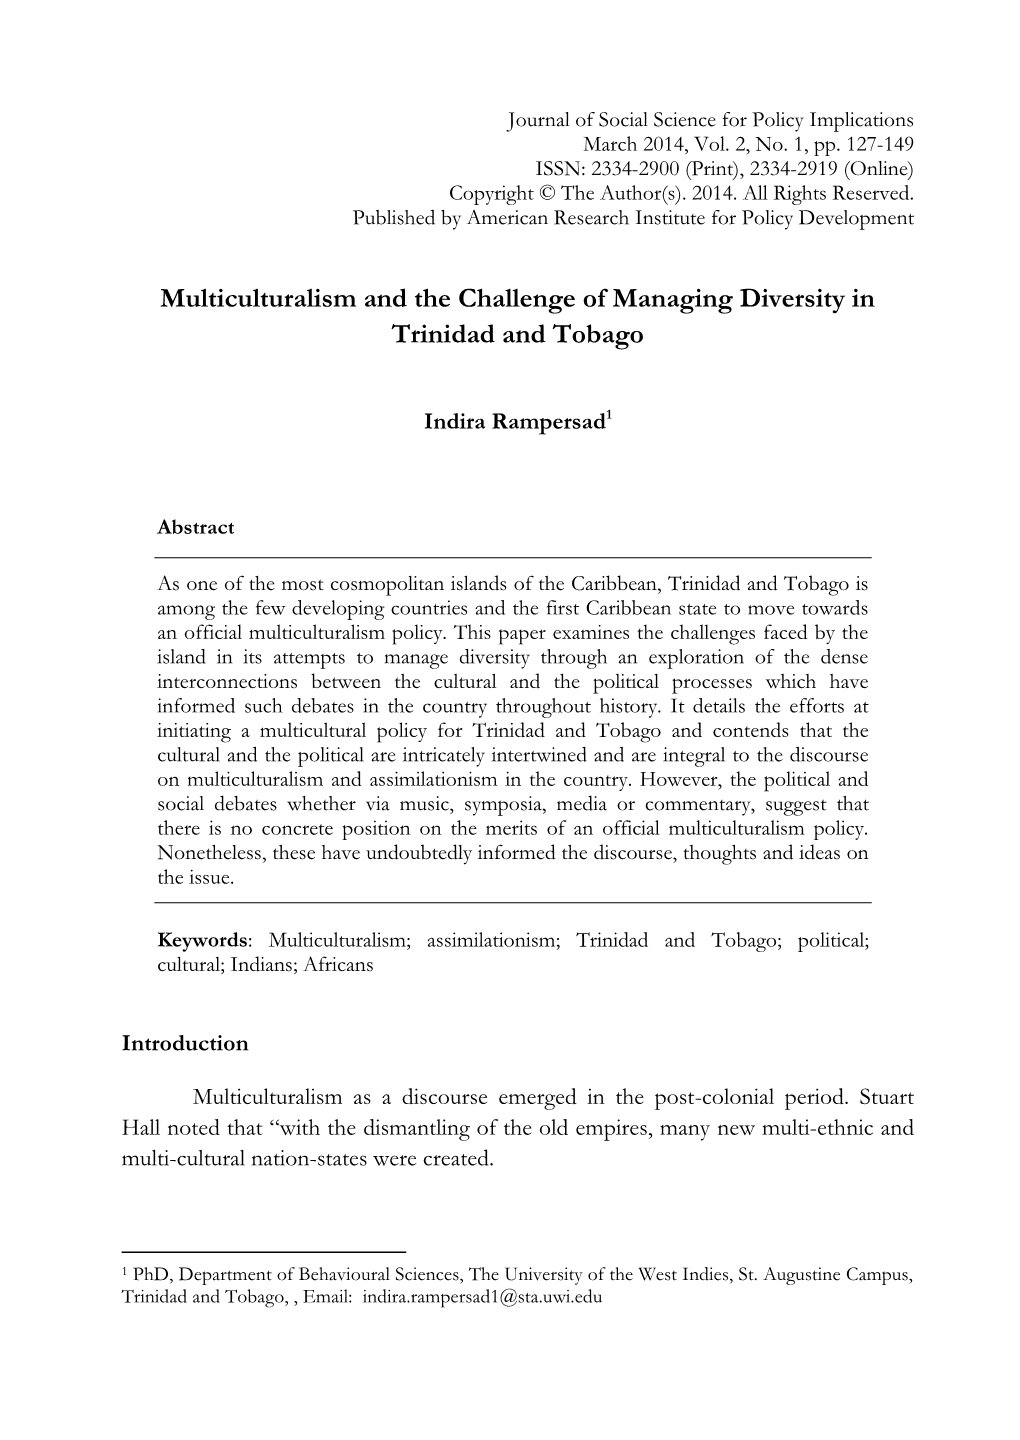 Multiculturalism and the Challenge of Managing Diversity in Trinidad and Tobago